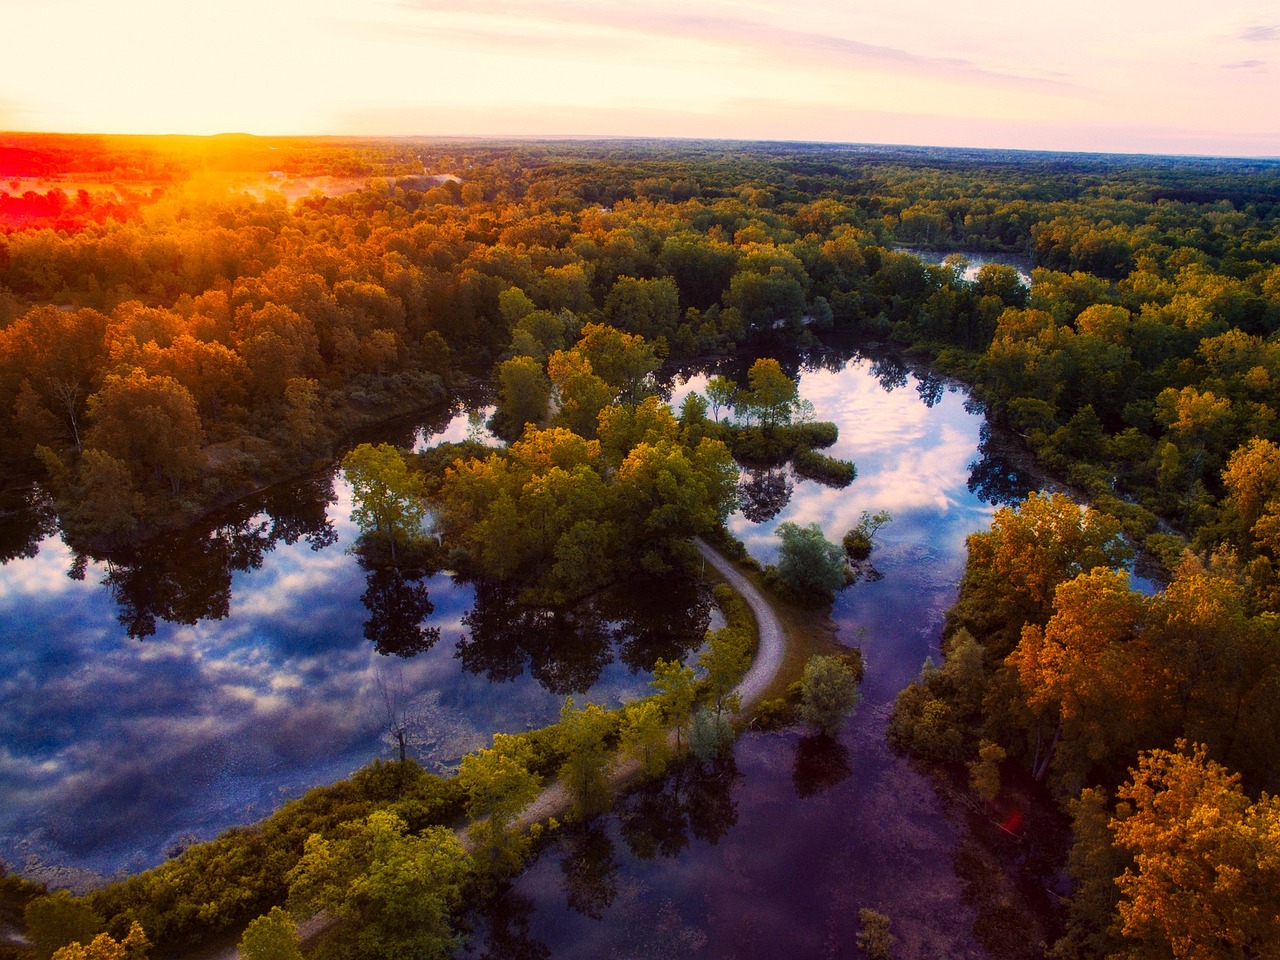 a river running through a lush green forest, by Jacob Kainen, pexels, autumn sunrise warm light, aerial view cinestill 800t 18mm, michigan, located in a swamp at sunrise